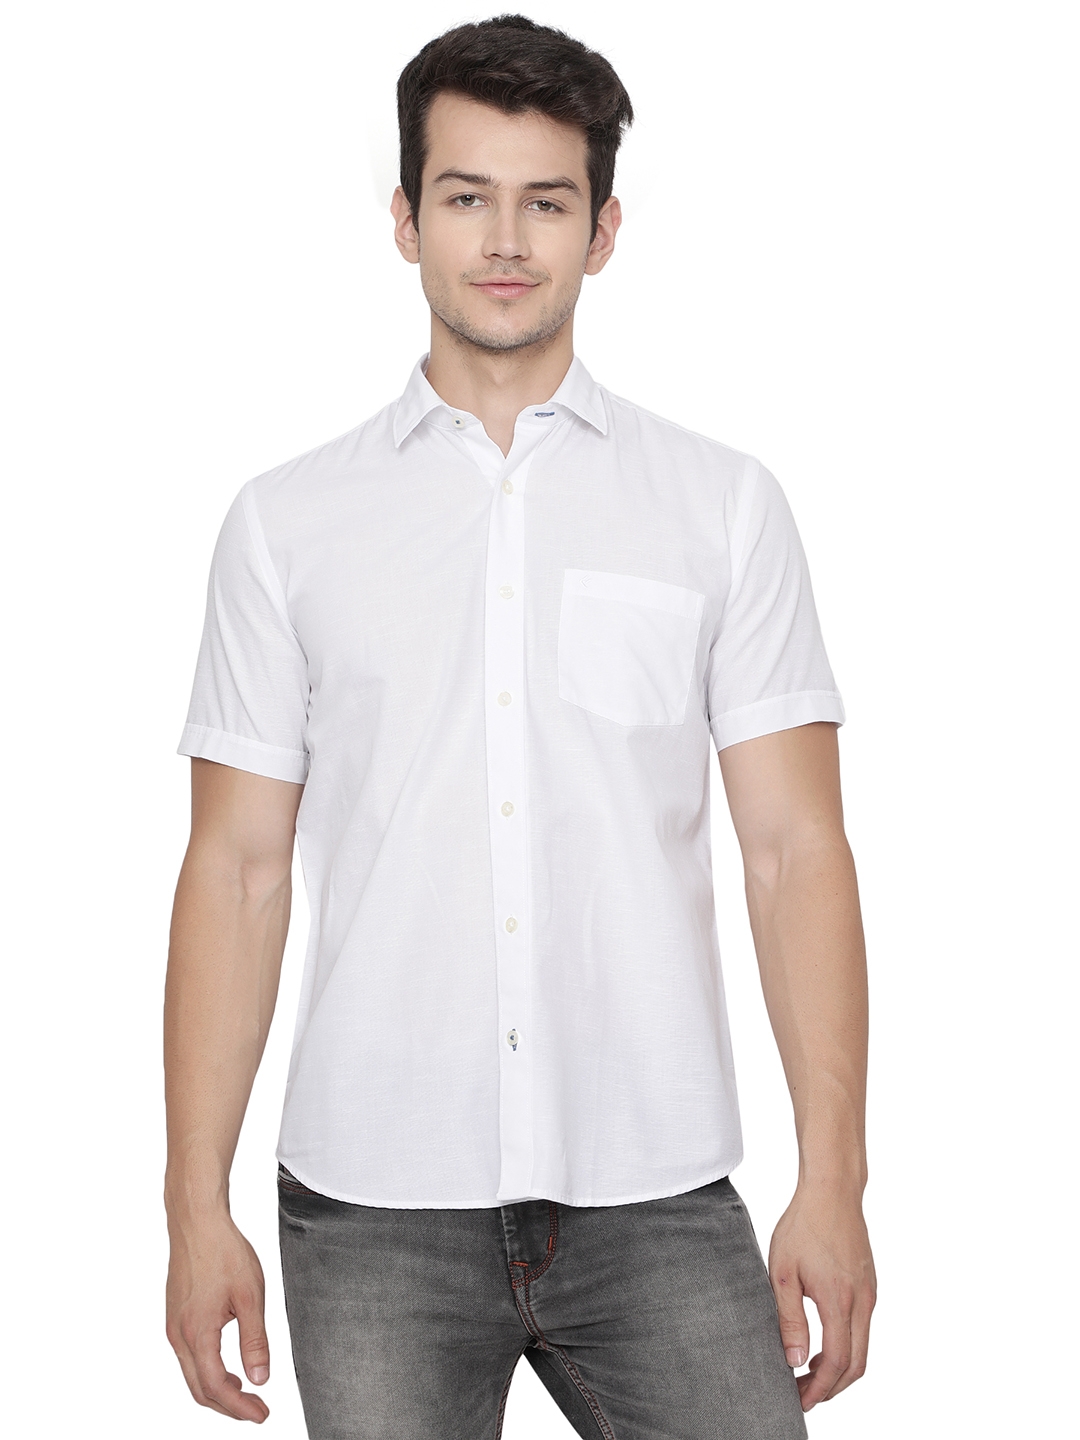 Greenfibre | Bright White Solid Slim Fit Casual Shirt | Greenfibre